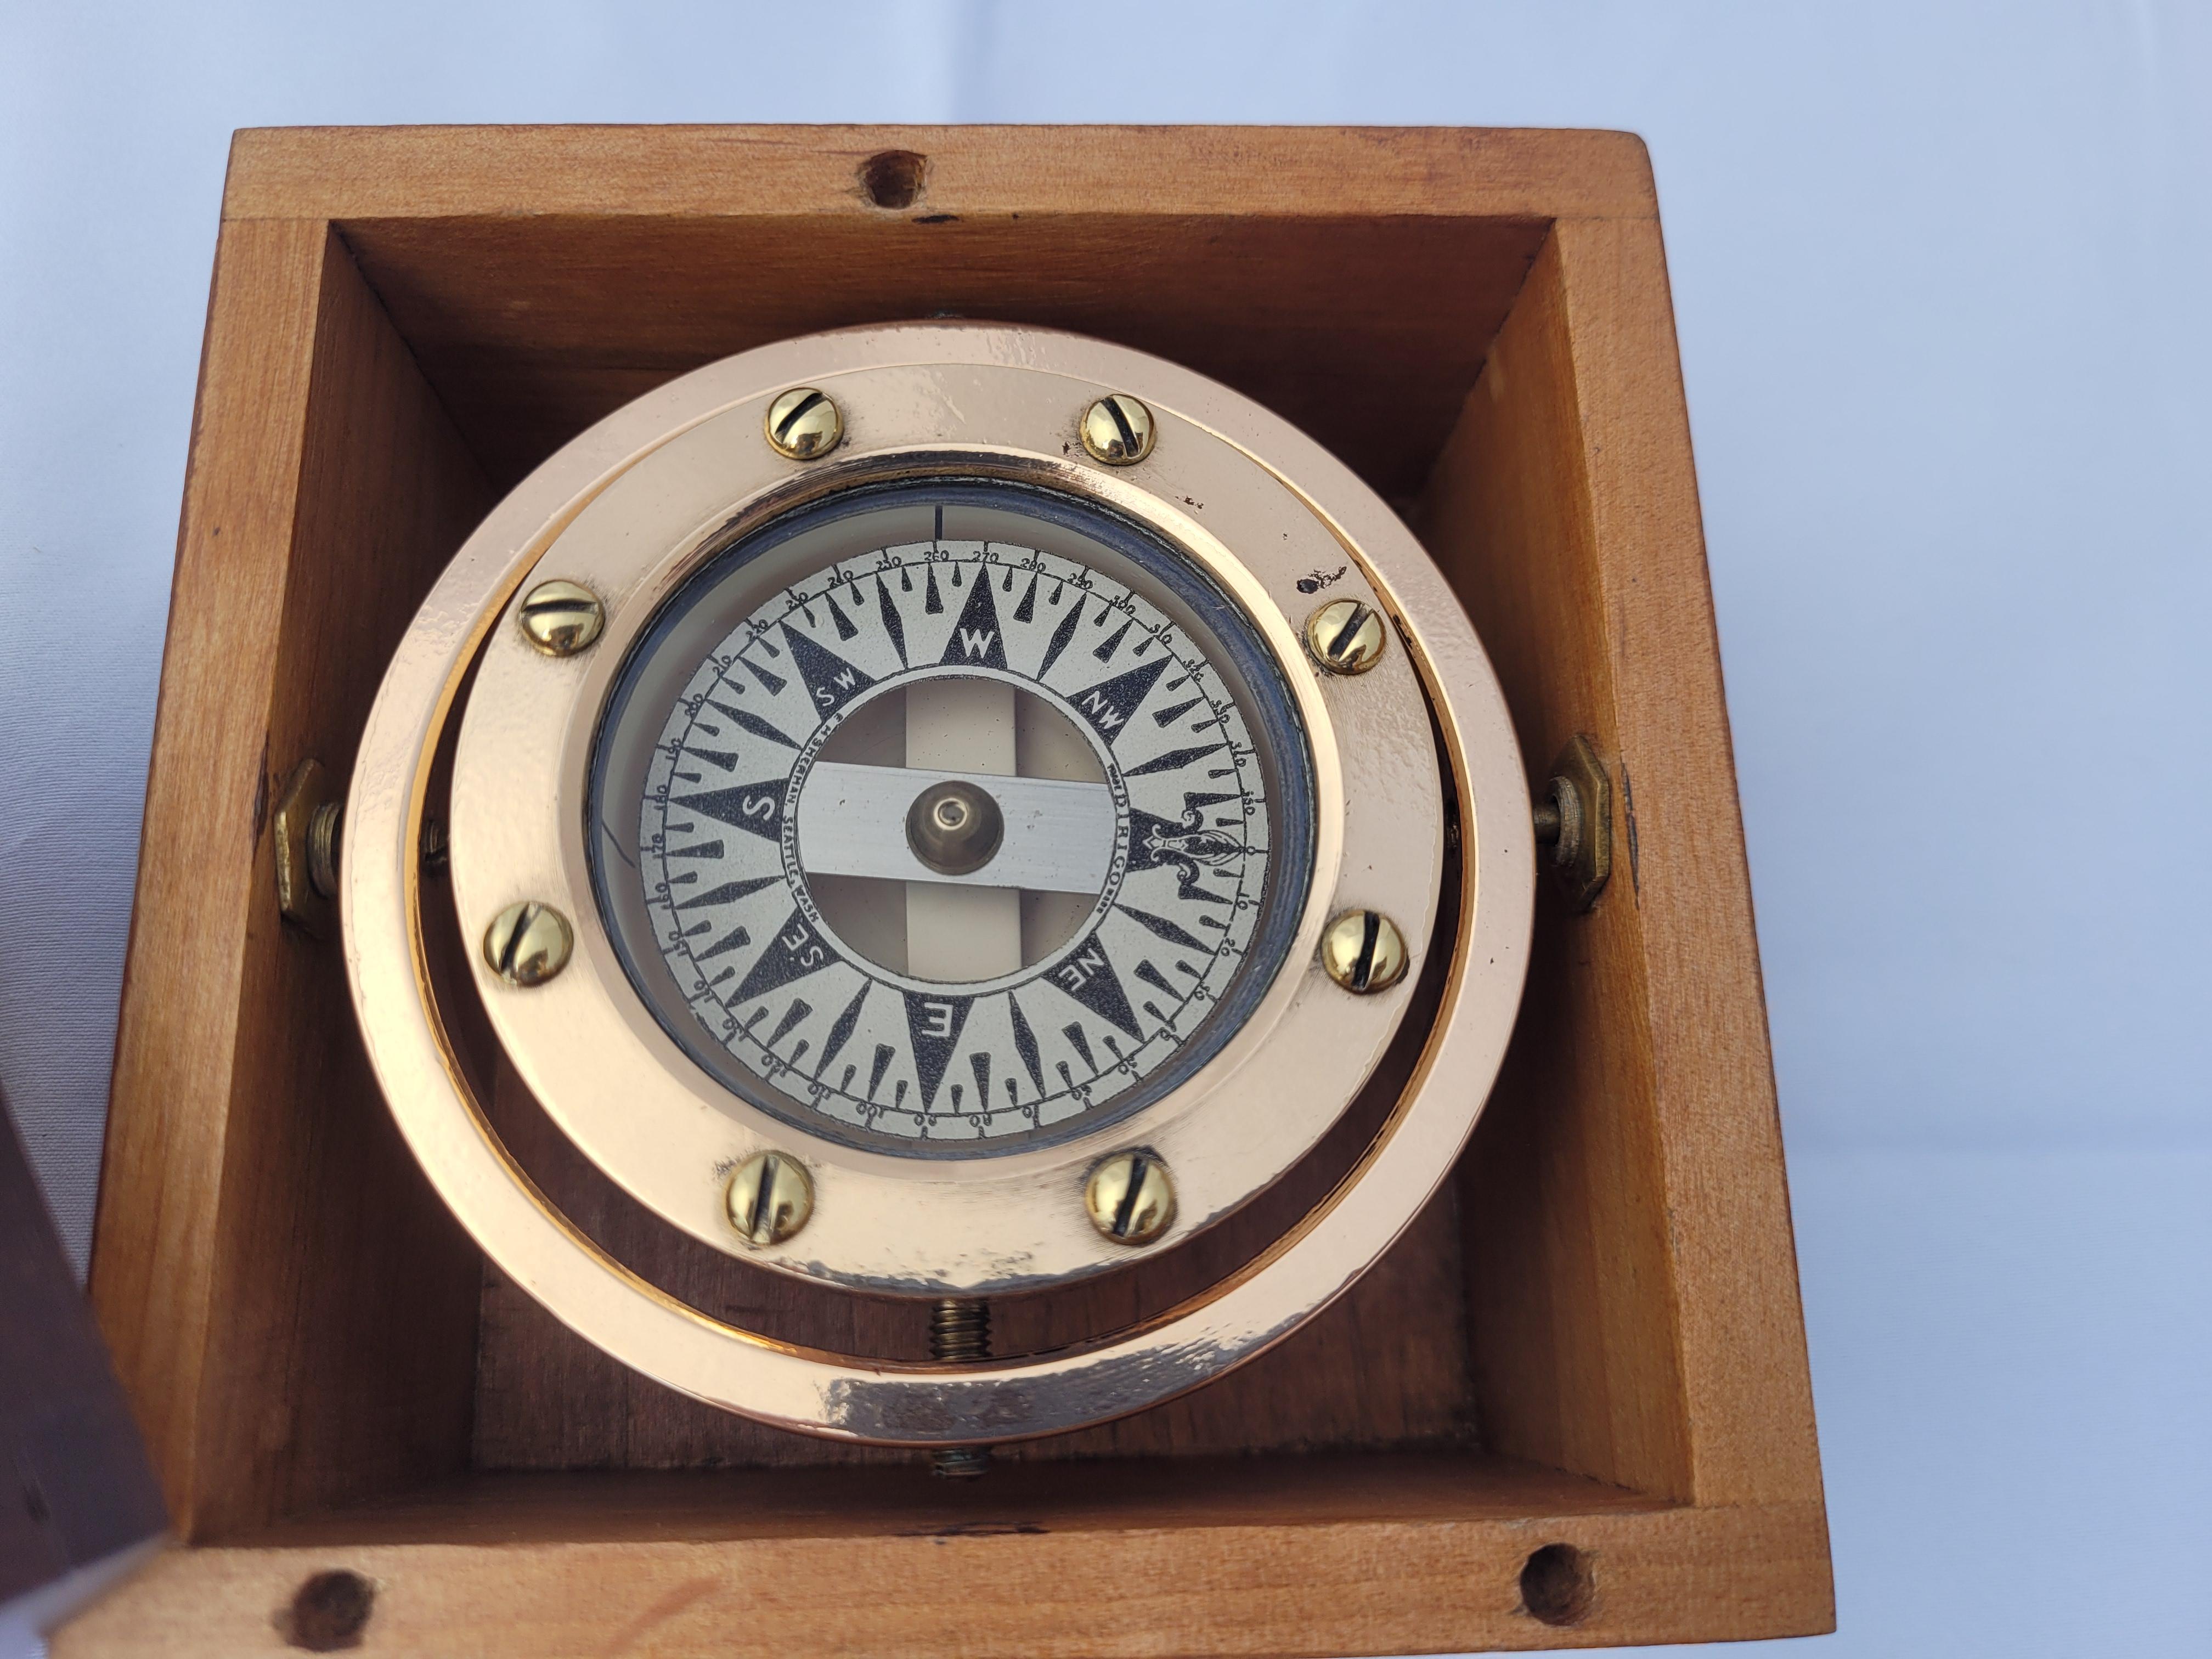 Classic early twentieth century boat compass by Dirigo of Seattle Washington. The entire gimballed compass has been meticulously polished and lacquered. This Classic marine instrument is fitted to its original hardwood box with a fine varnished